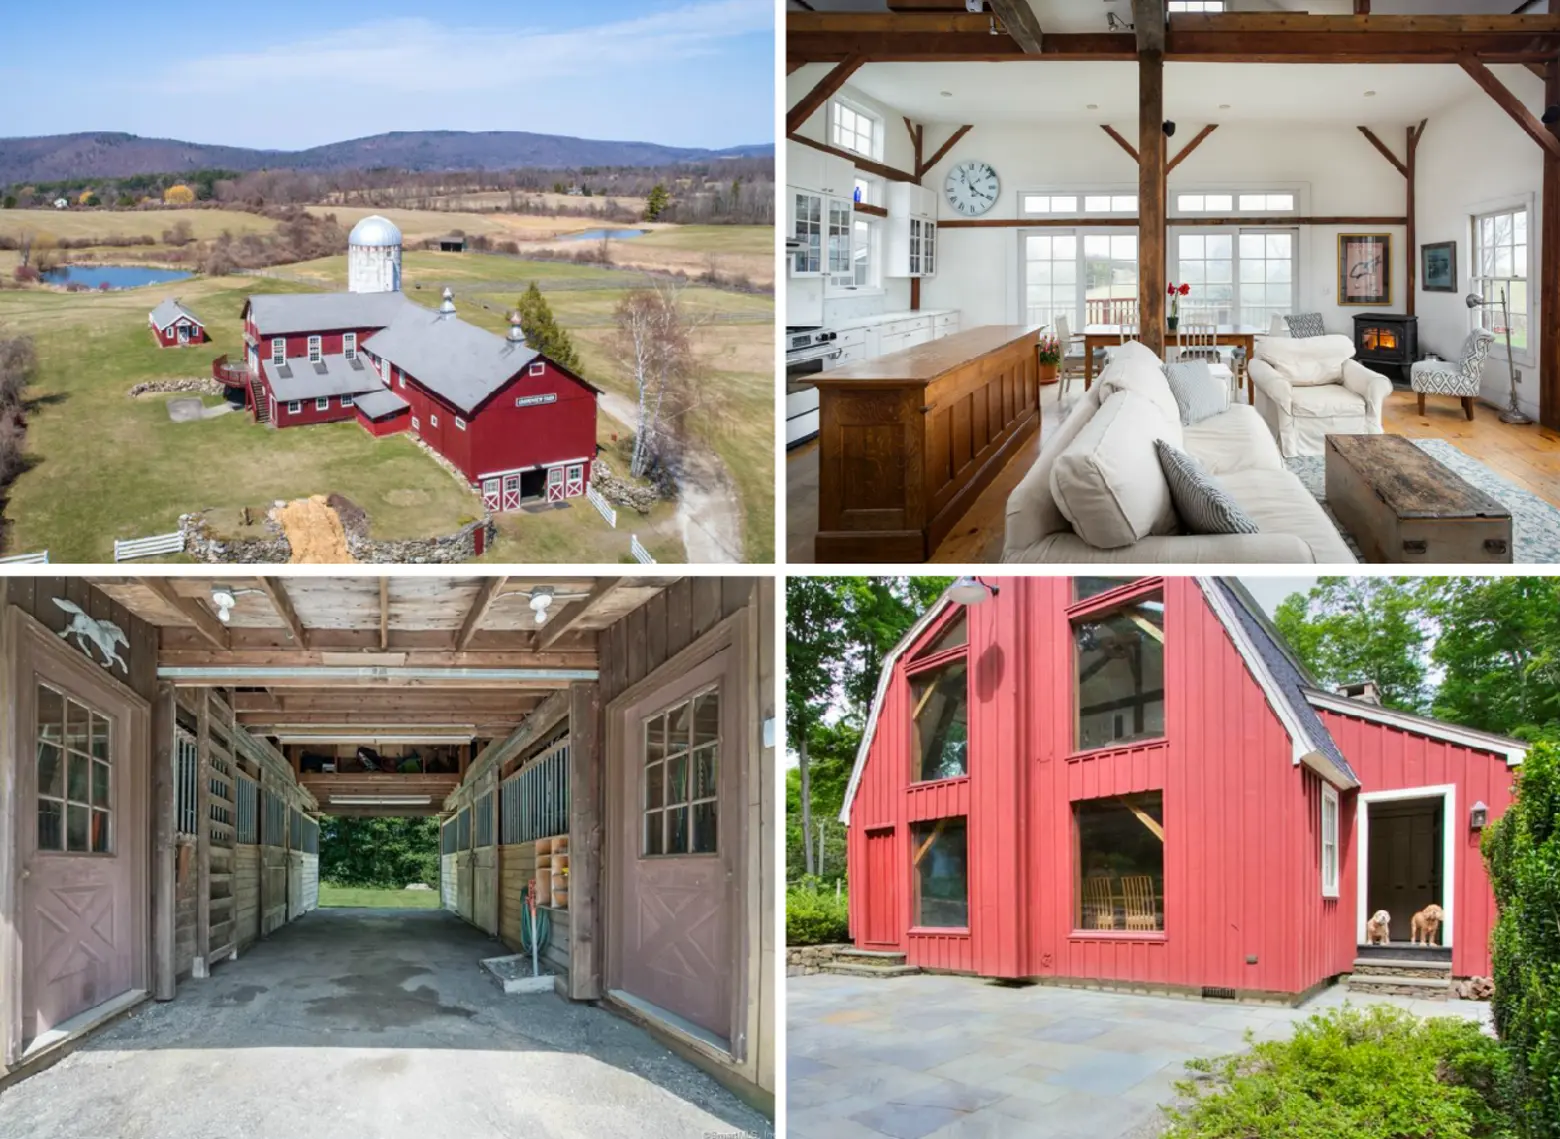 Are barns the next Williamsburg? Millennials head out of NYC to ‘upcycle’ rustic residences